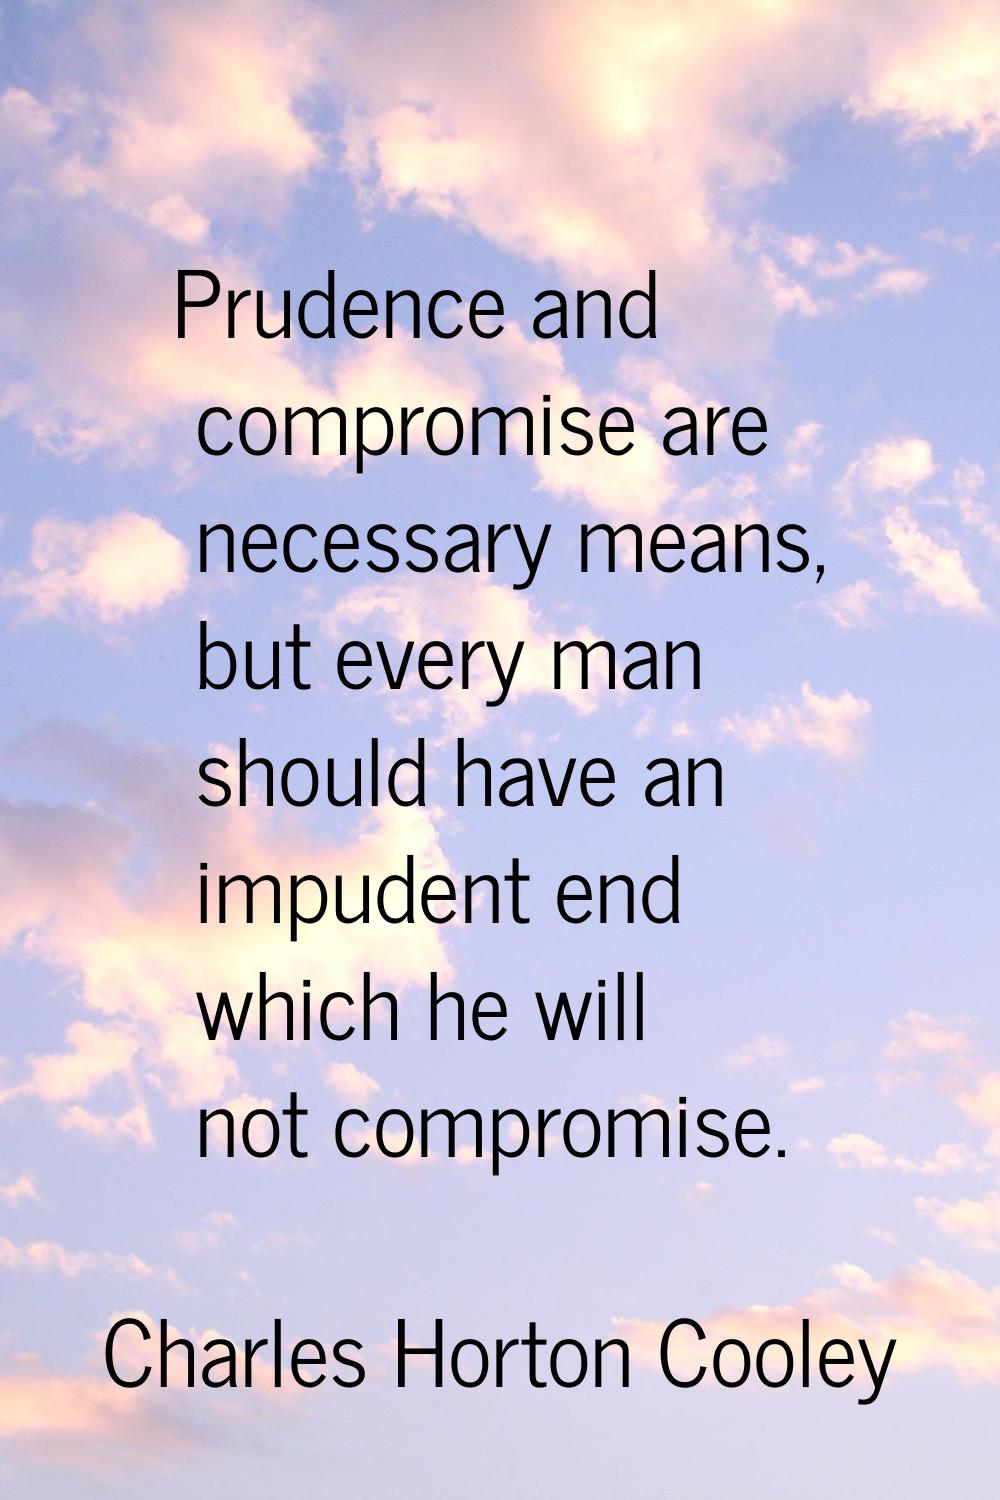 Prudence and compromise are necessary means, but every man should have an impudent end which he wil